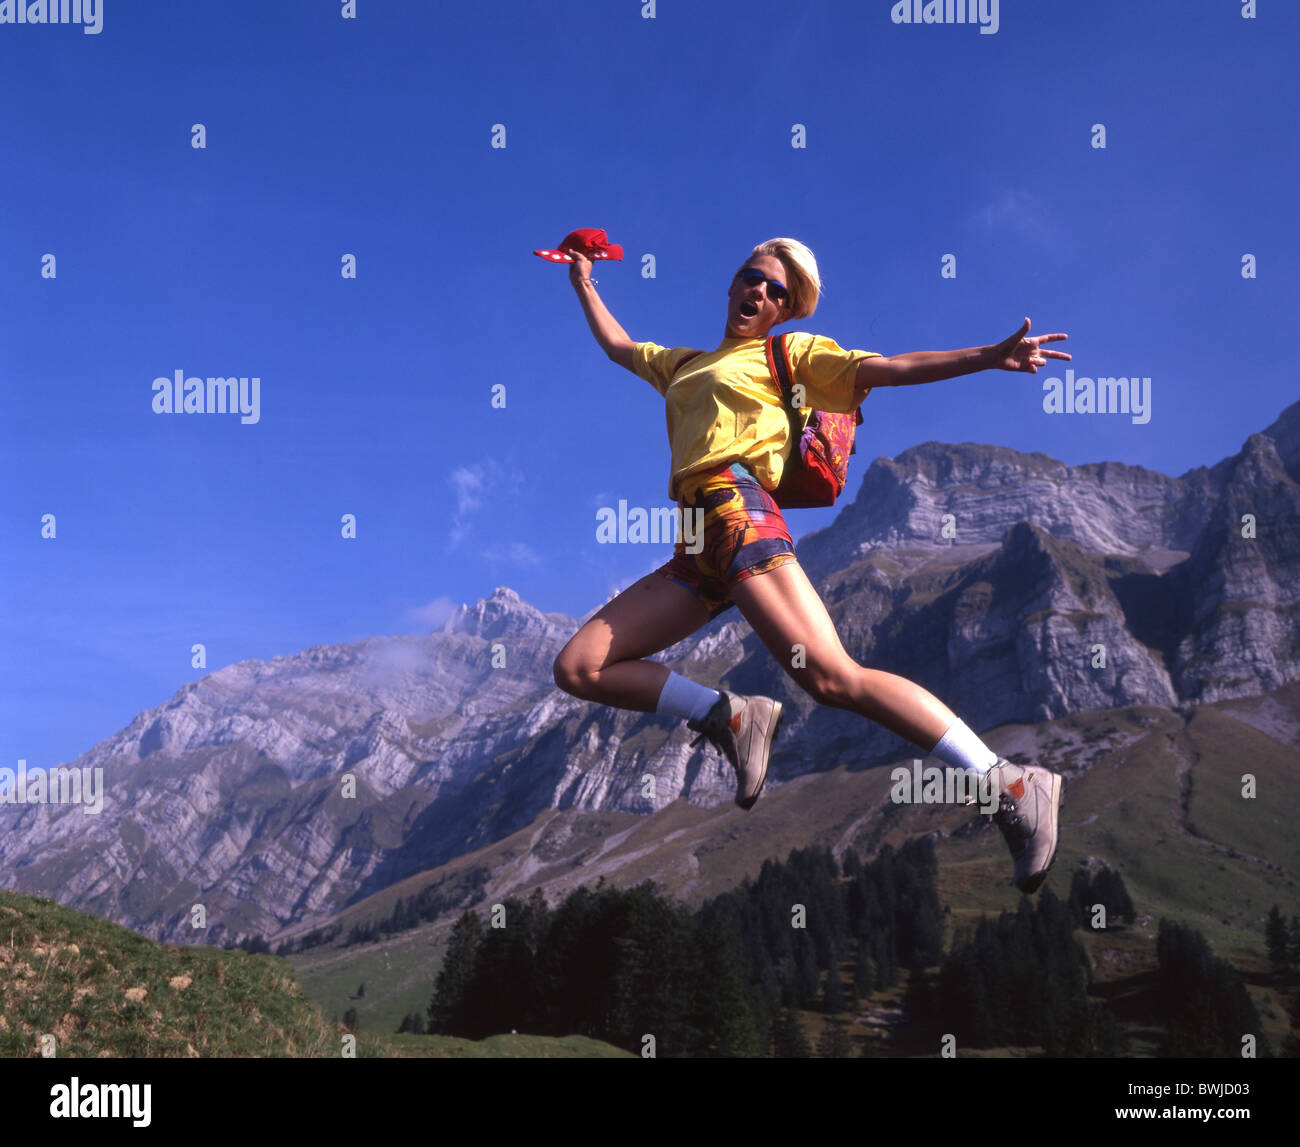 hiking mountain hiking woman teenager youngsters jump action fun joke mountains Alps Alpstein spare time Stock Photo